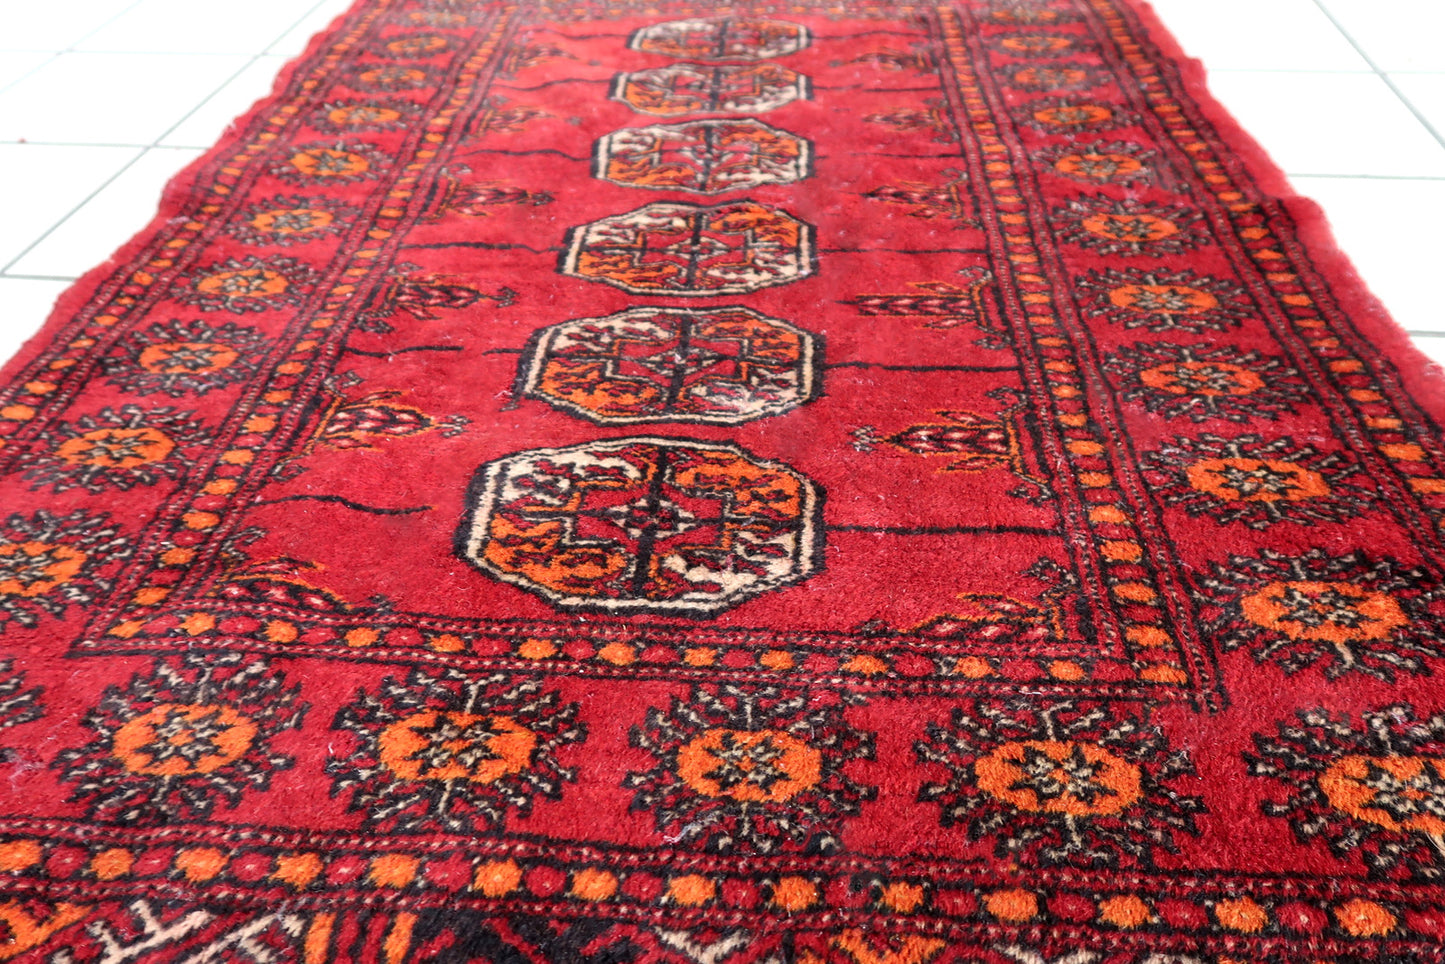 Handmade vintage Pakistani Lahore rug in bright red color. The rug is from the end of 20th century in original condition, it has some low pile. The rug made in traditional design. The rug is thin.